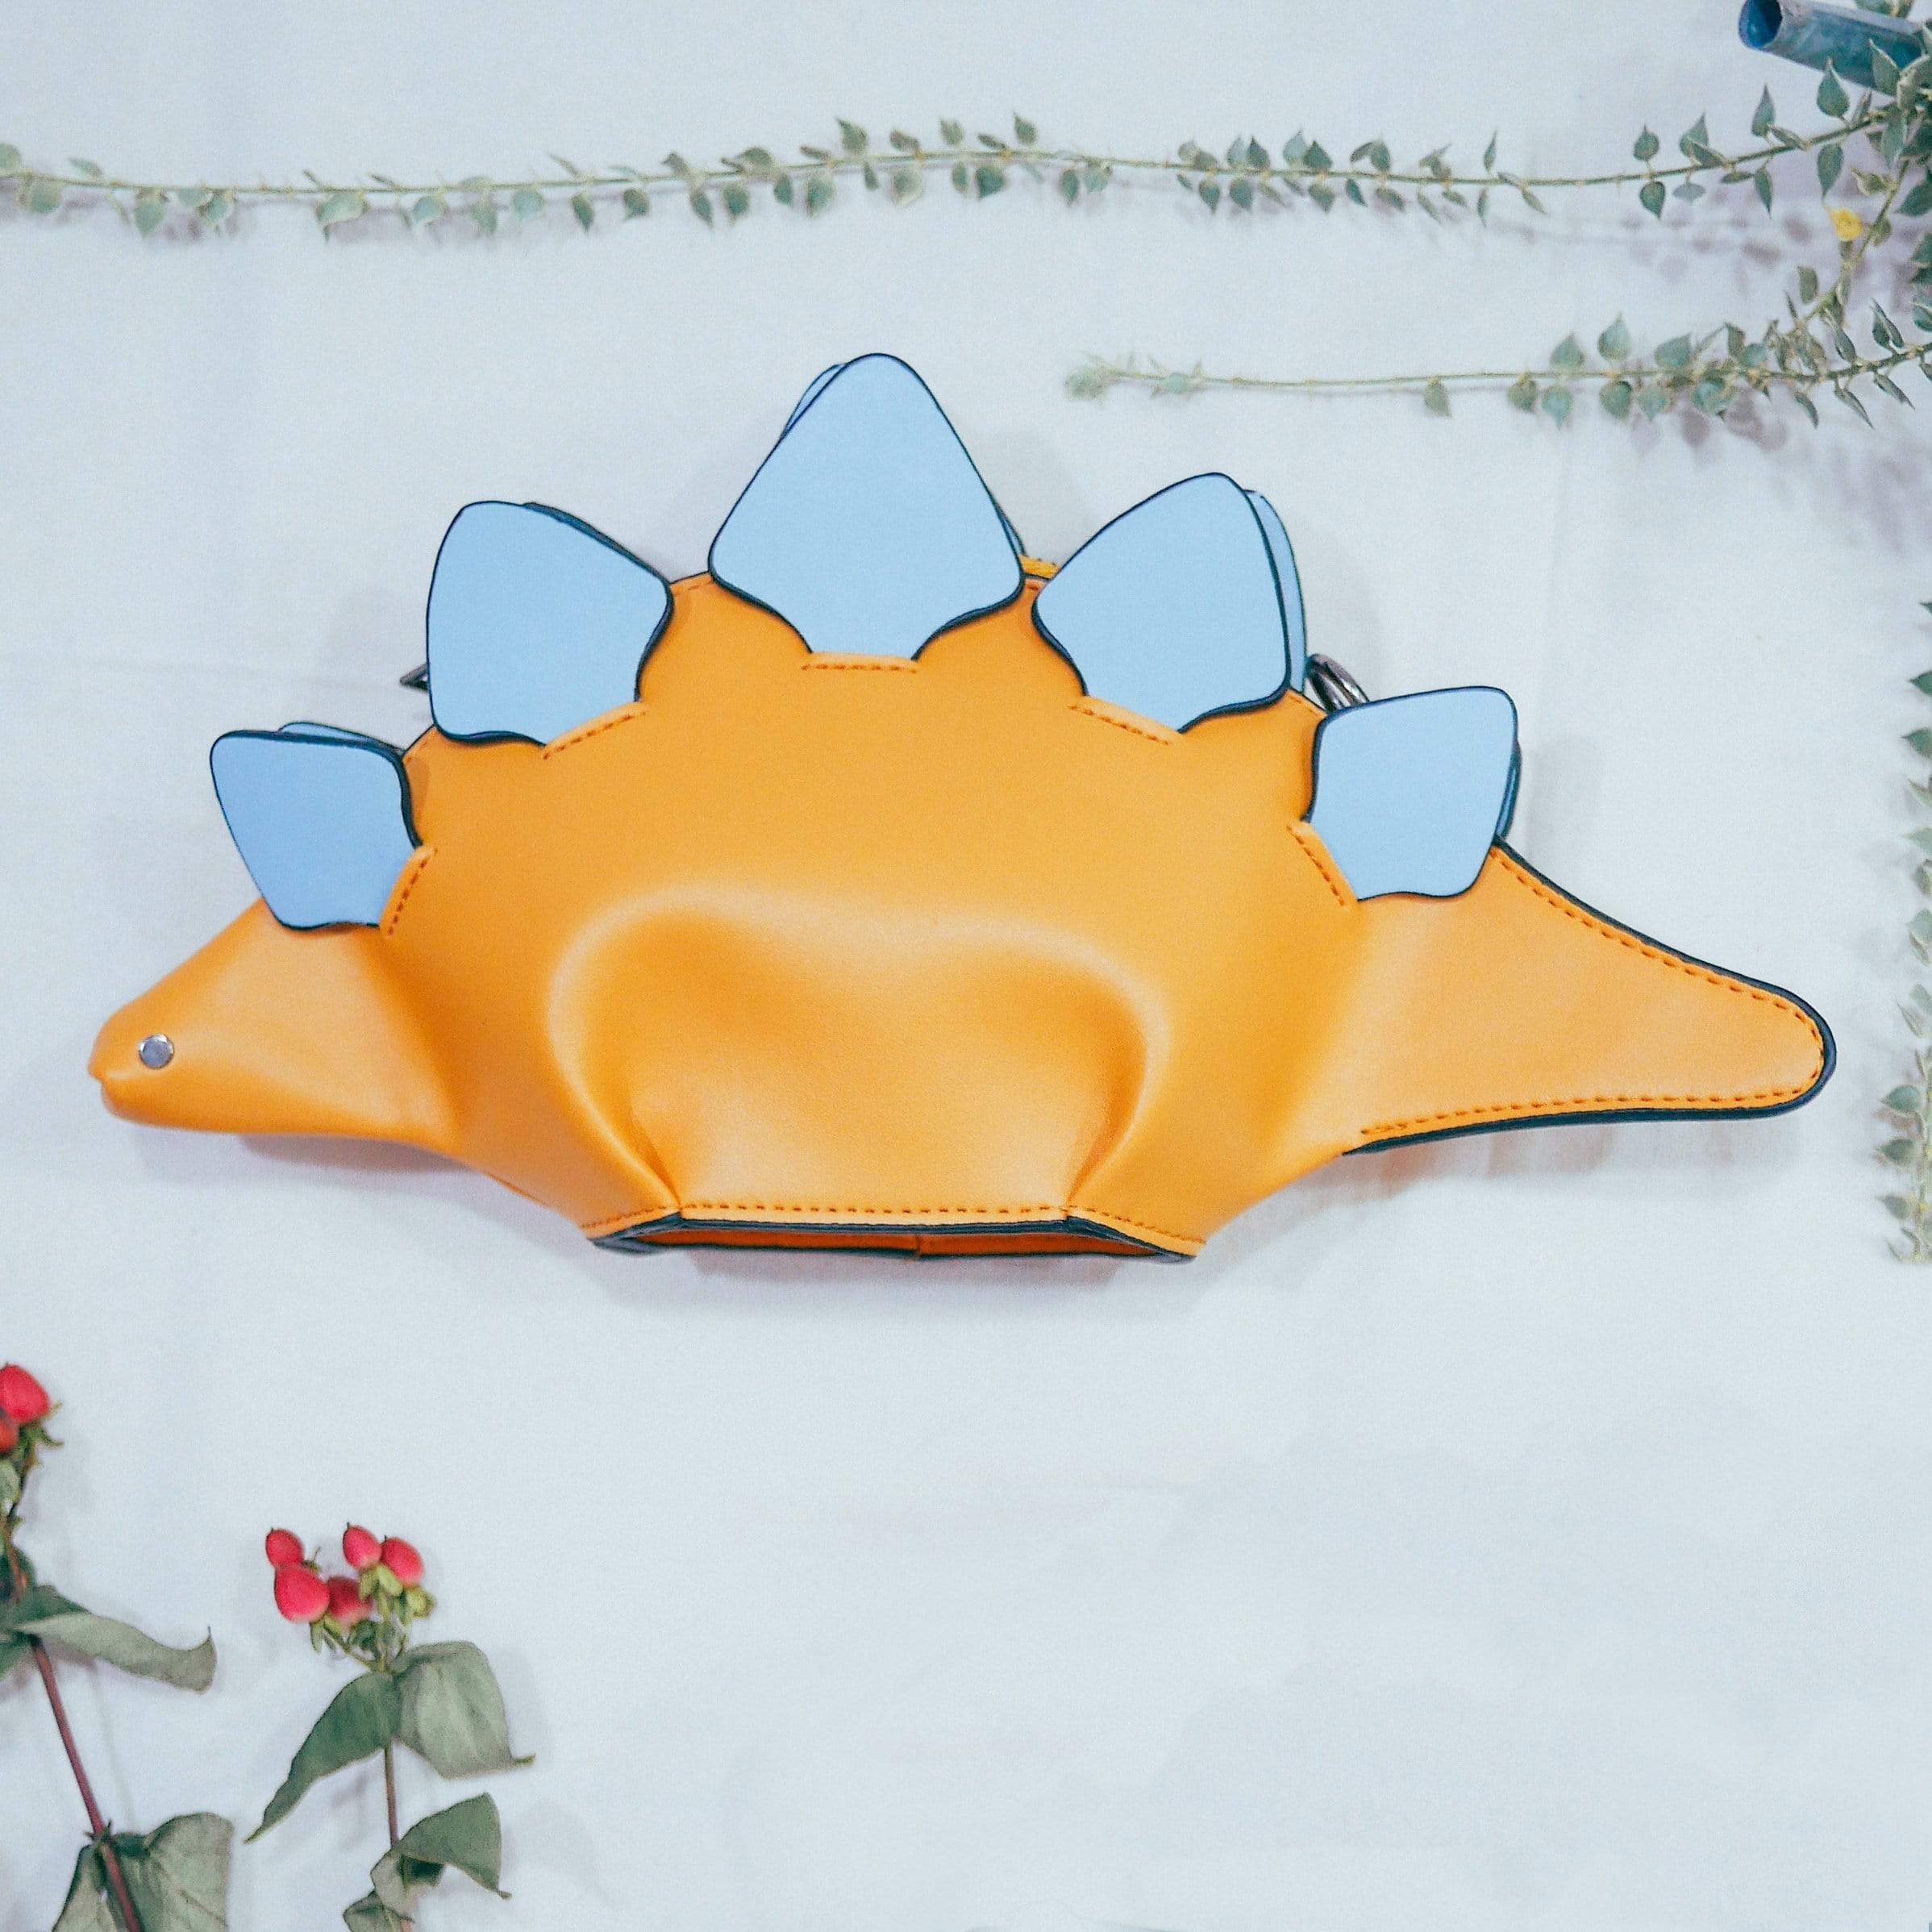 Mommy Stegosaurus (ages 6 to adults) Butterscotch-blue